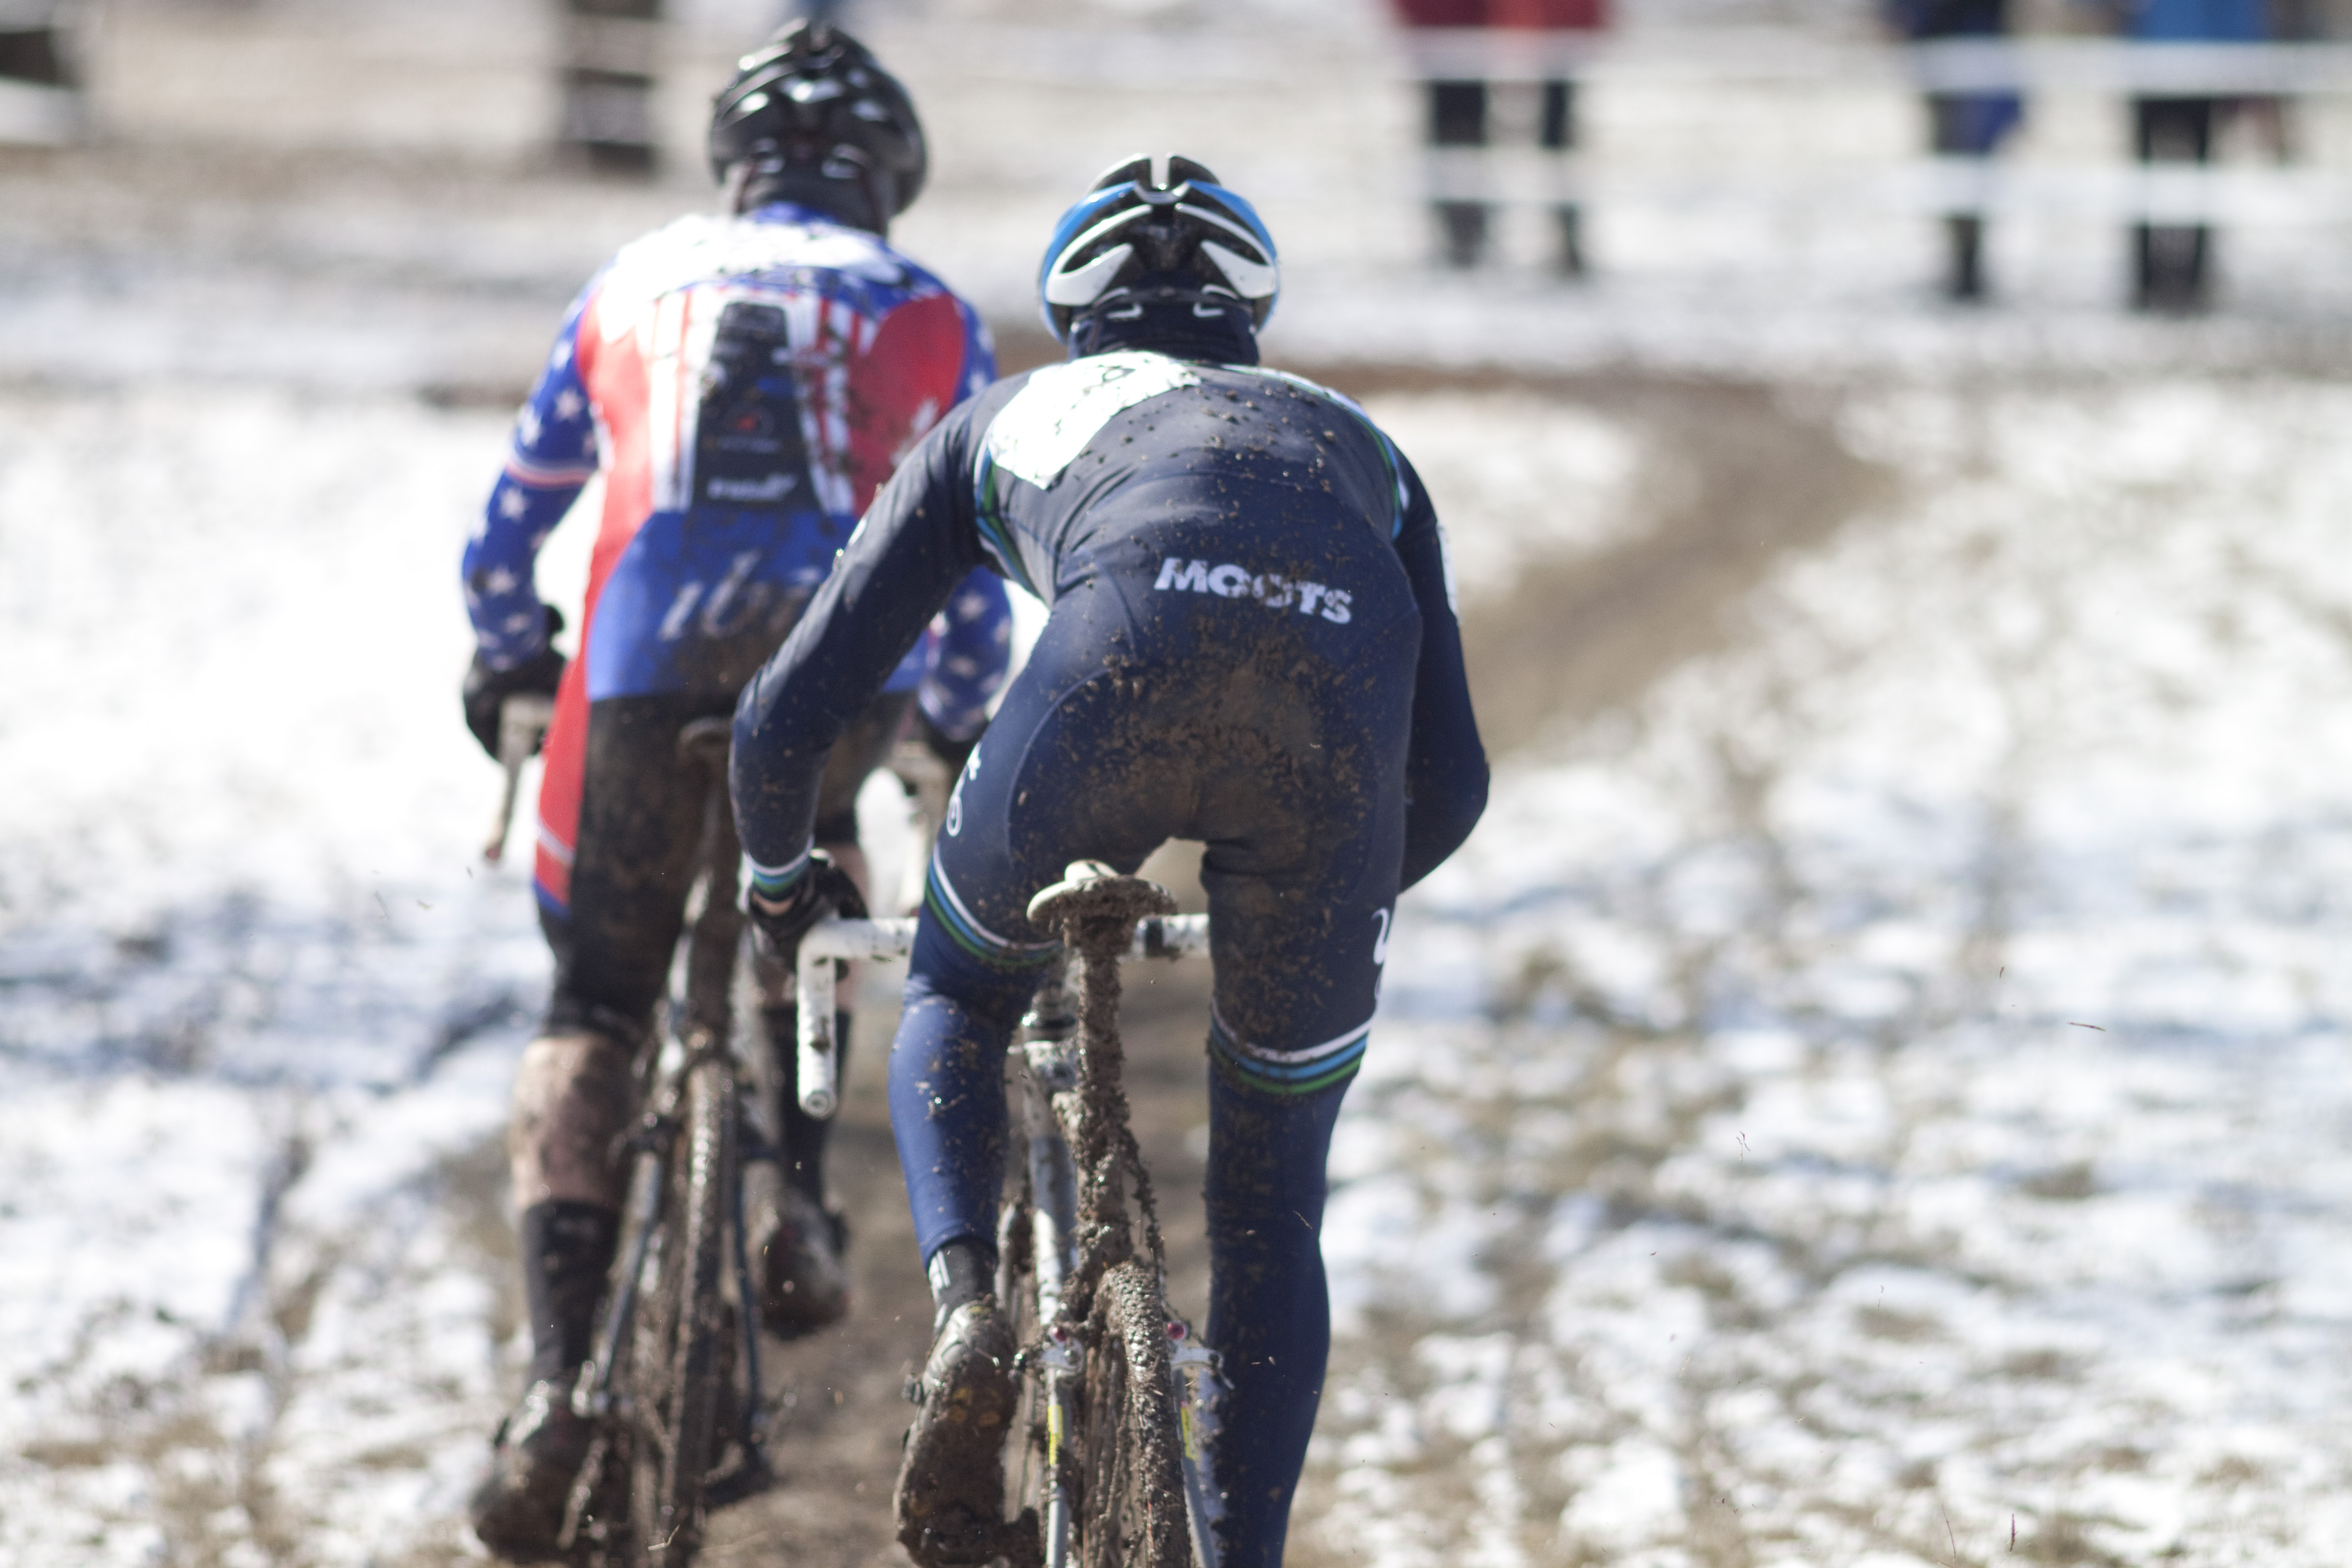 Don Myrah battling with Jon Cariveau in the tightest race of the day. 2013 Cyclocross World Championships, Masters 45-49. © Cyclocross Magazine